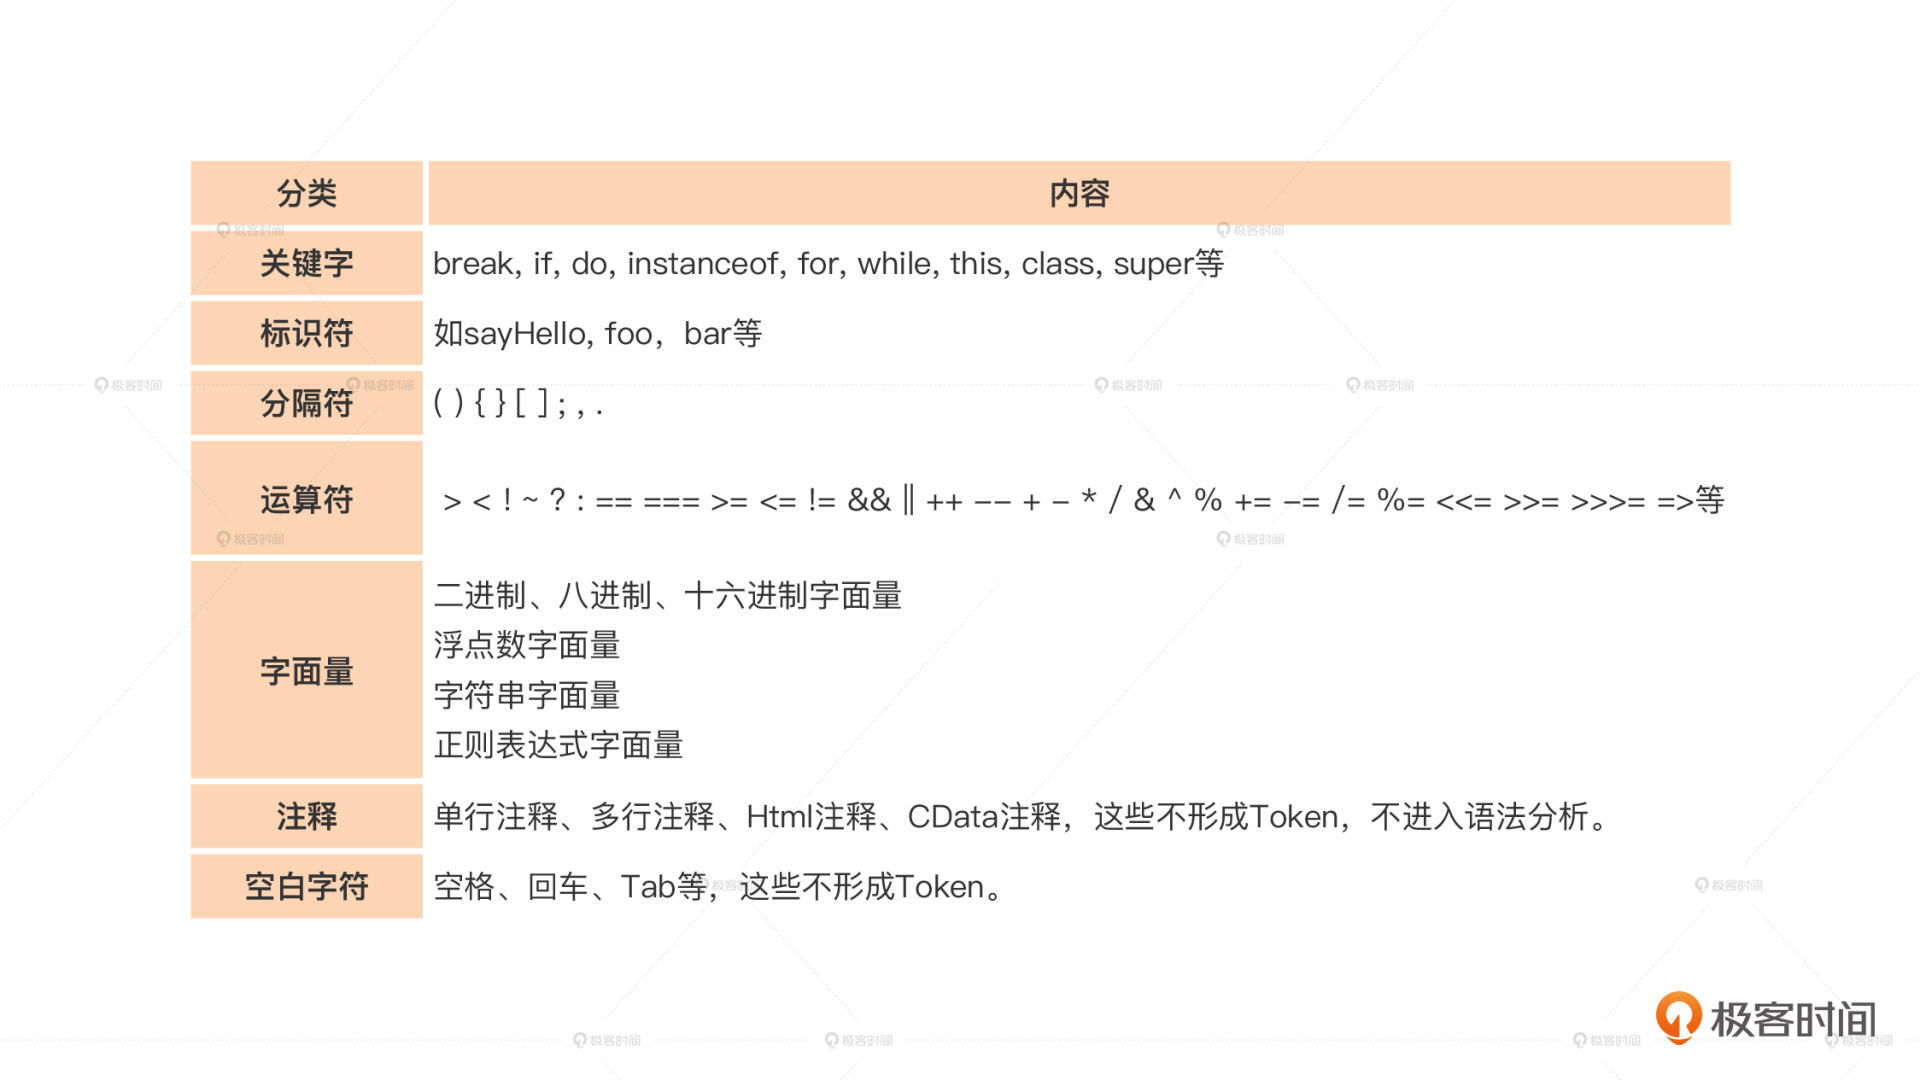 https://img.zhaoweiguo.com/knowledge/images/cores/compilers/langs/lexical-analysis2.jpeg